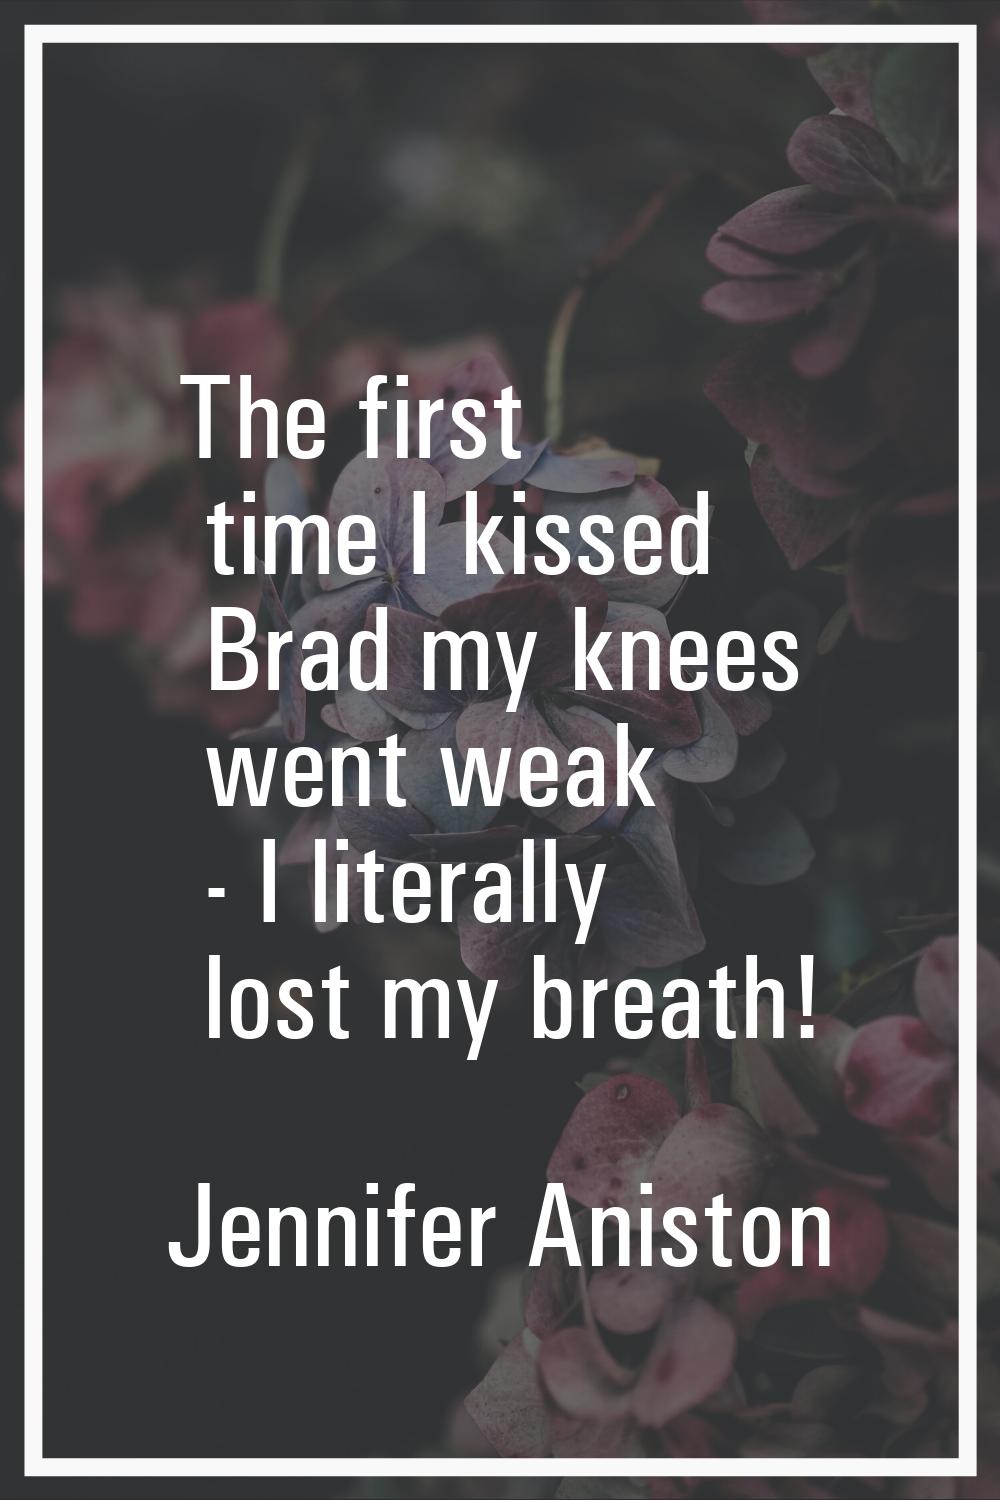 The first time I kissed Brad my knees went weak - I literally lost my breath!